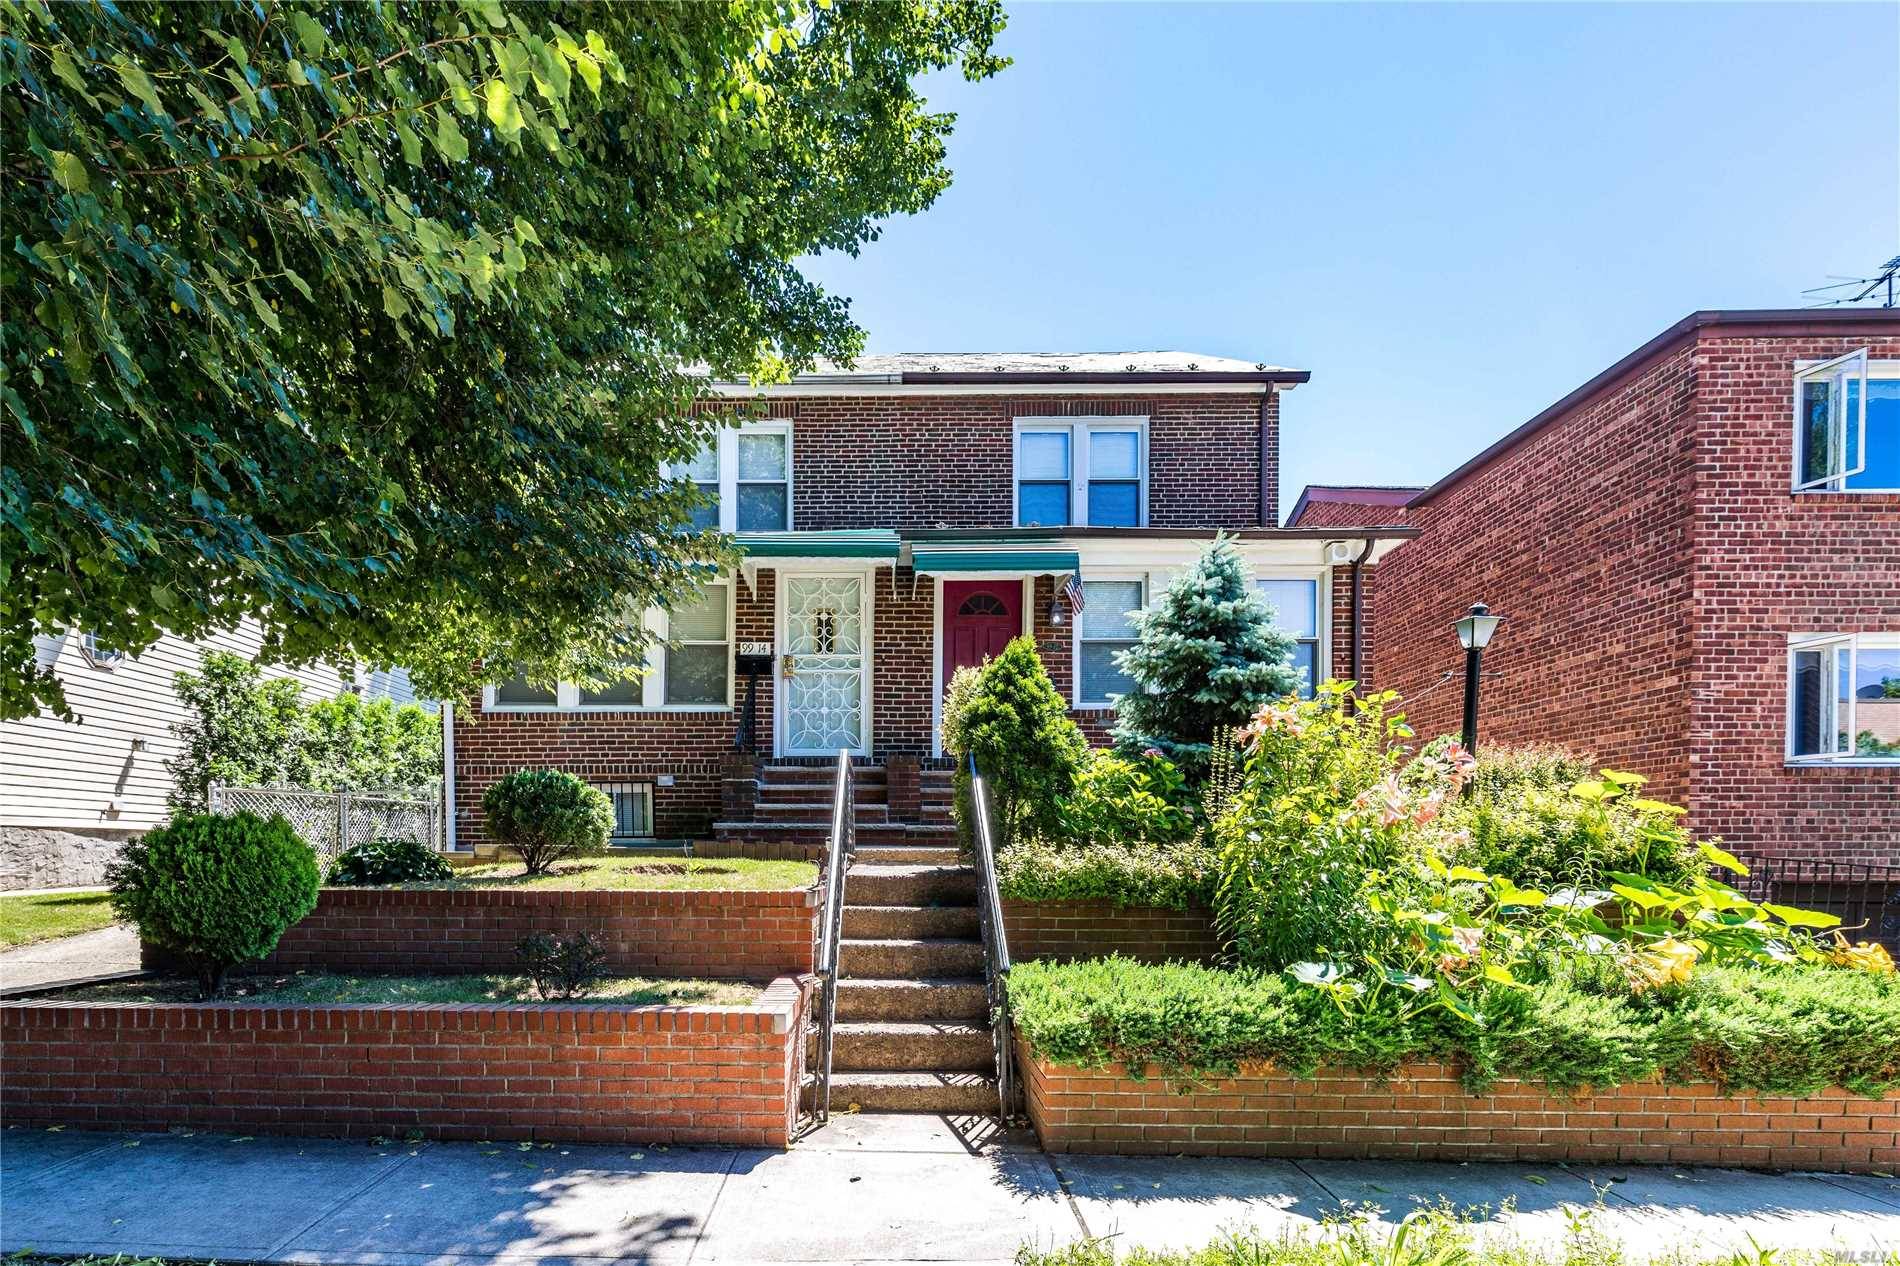 Fully Renovated Brick Semi-Detached House With Private Drive Way And 1 Detached Car Garage.